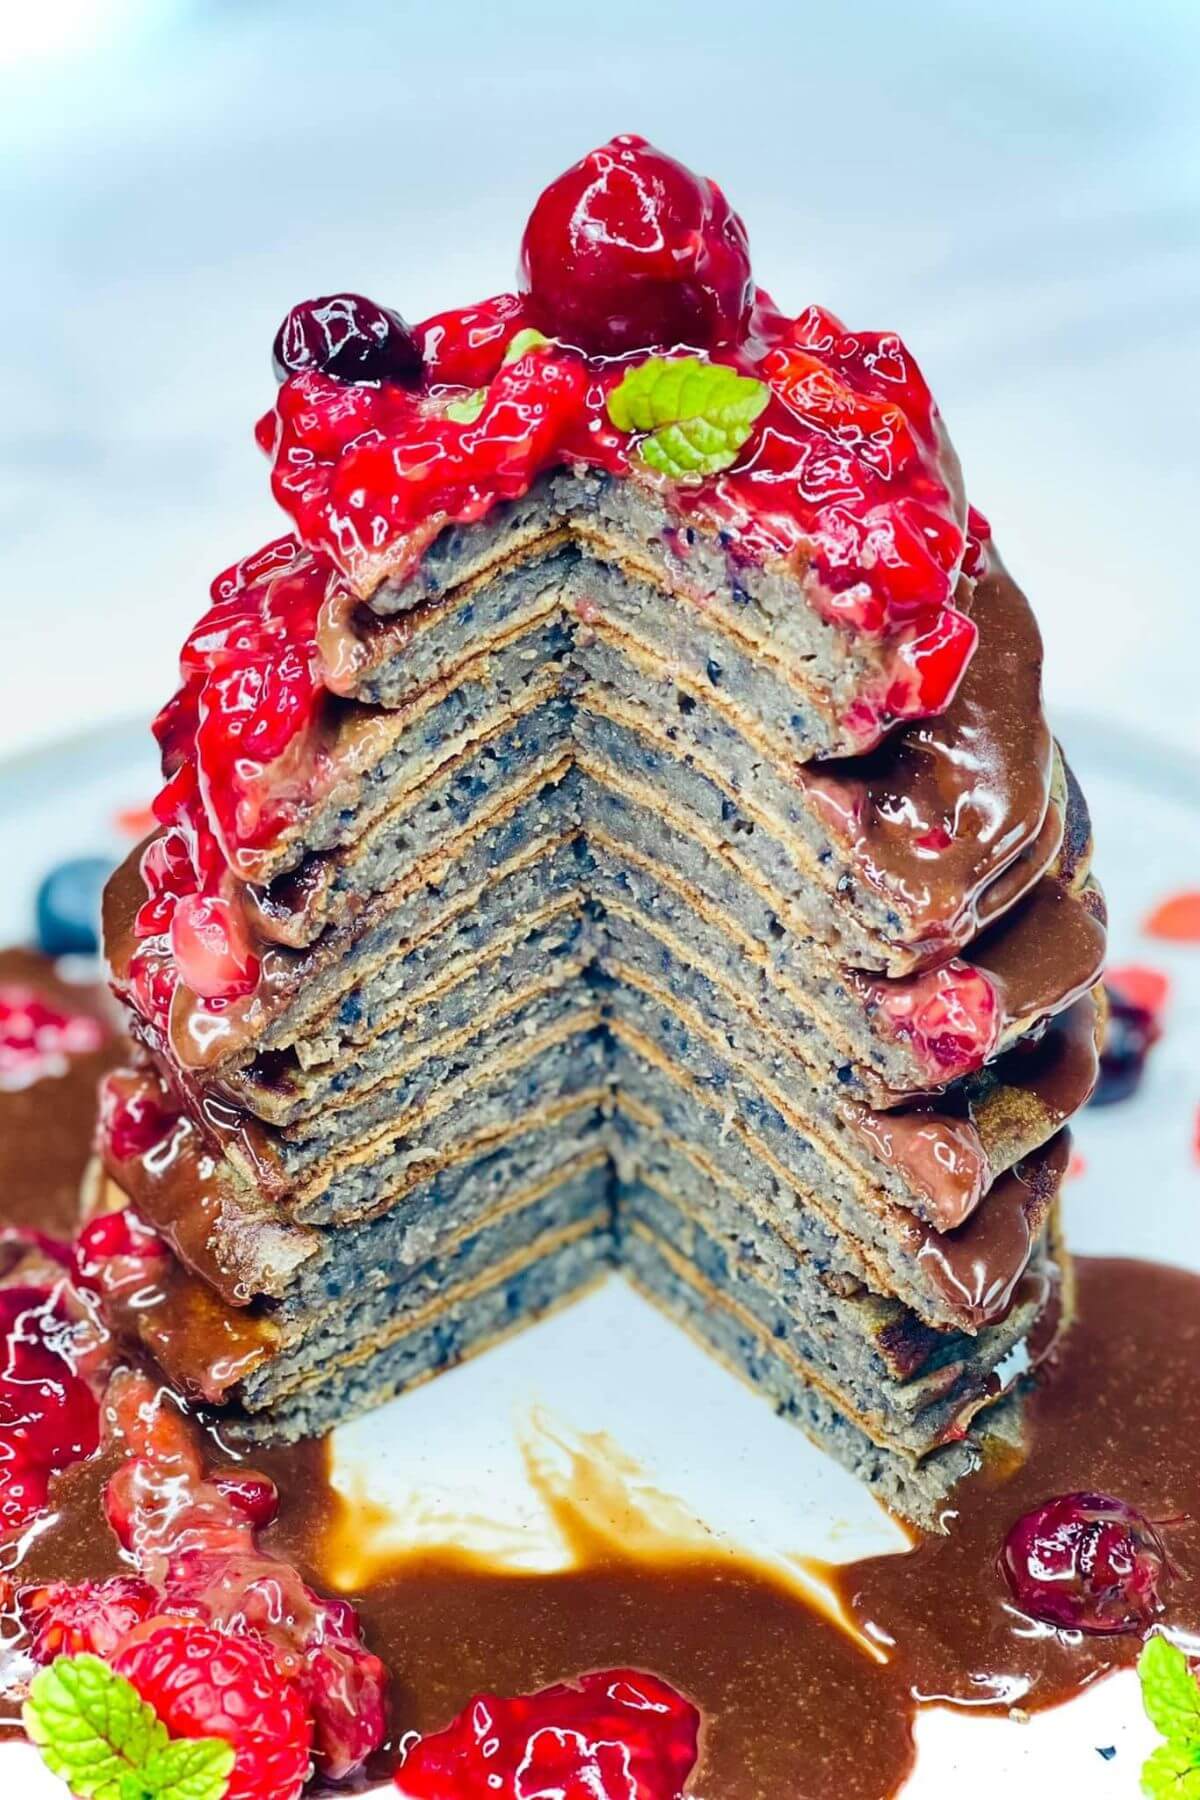 Stack of berry pancakes on a plate with mixed berry sauce and chocolate ganache drizzle, with a wedge cut out to show the interior fluffy texture. 